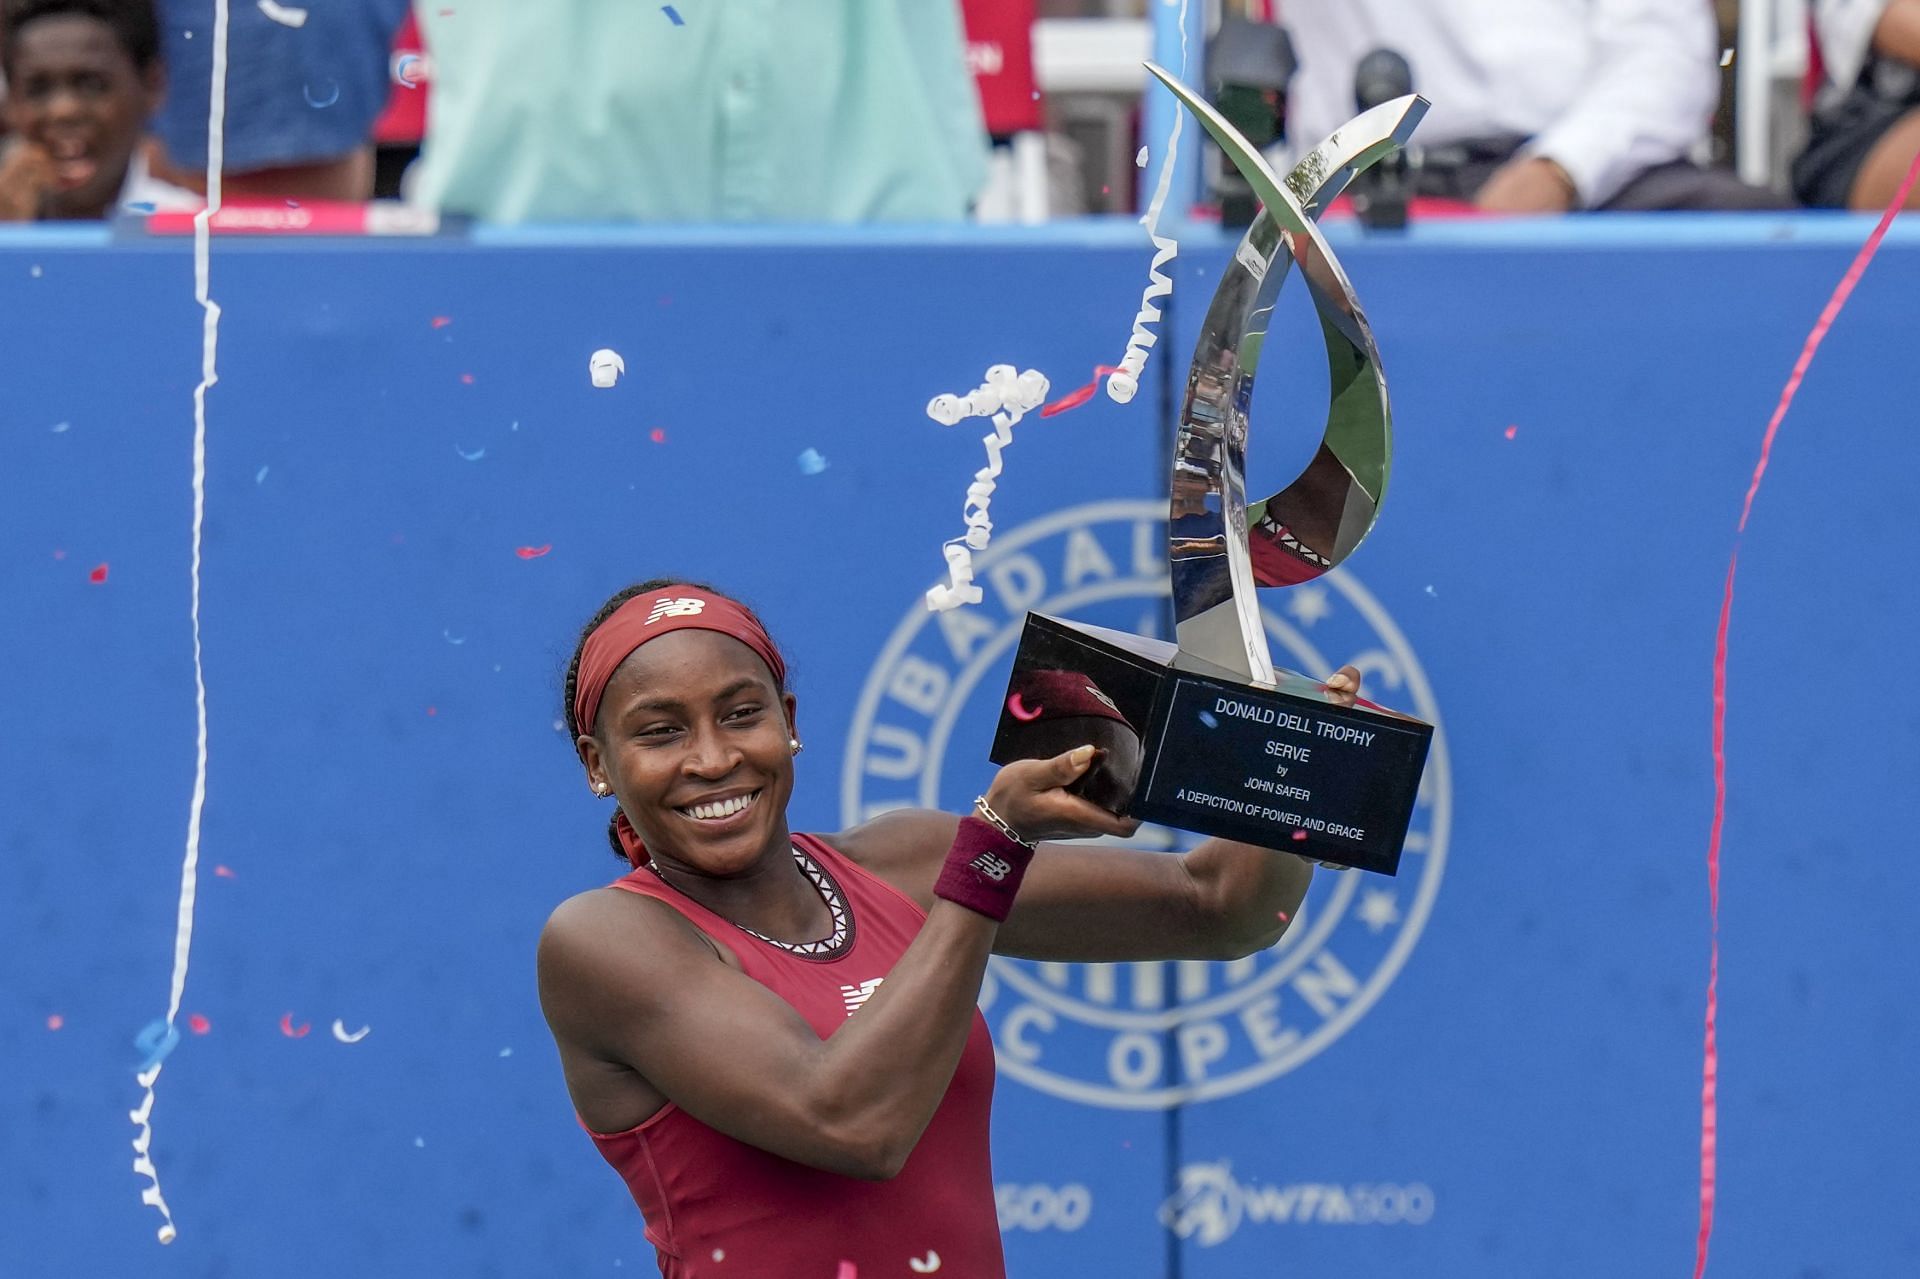 Coco Gauff recently won her fourth career title at the 2023 Citi Open in Washington, D. C.